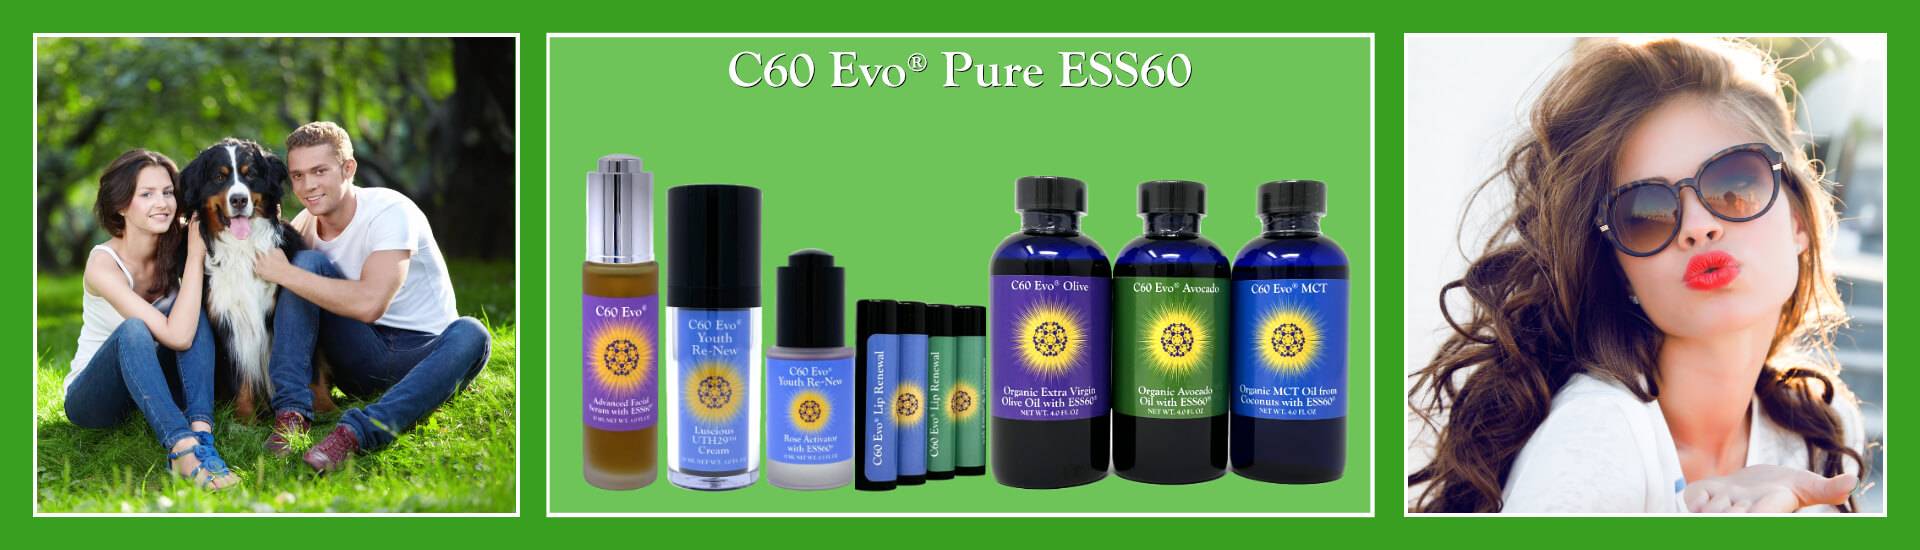 Late summer affiliate header with C60 Evo Advanced Skin and Energy Set